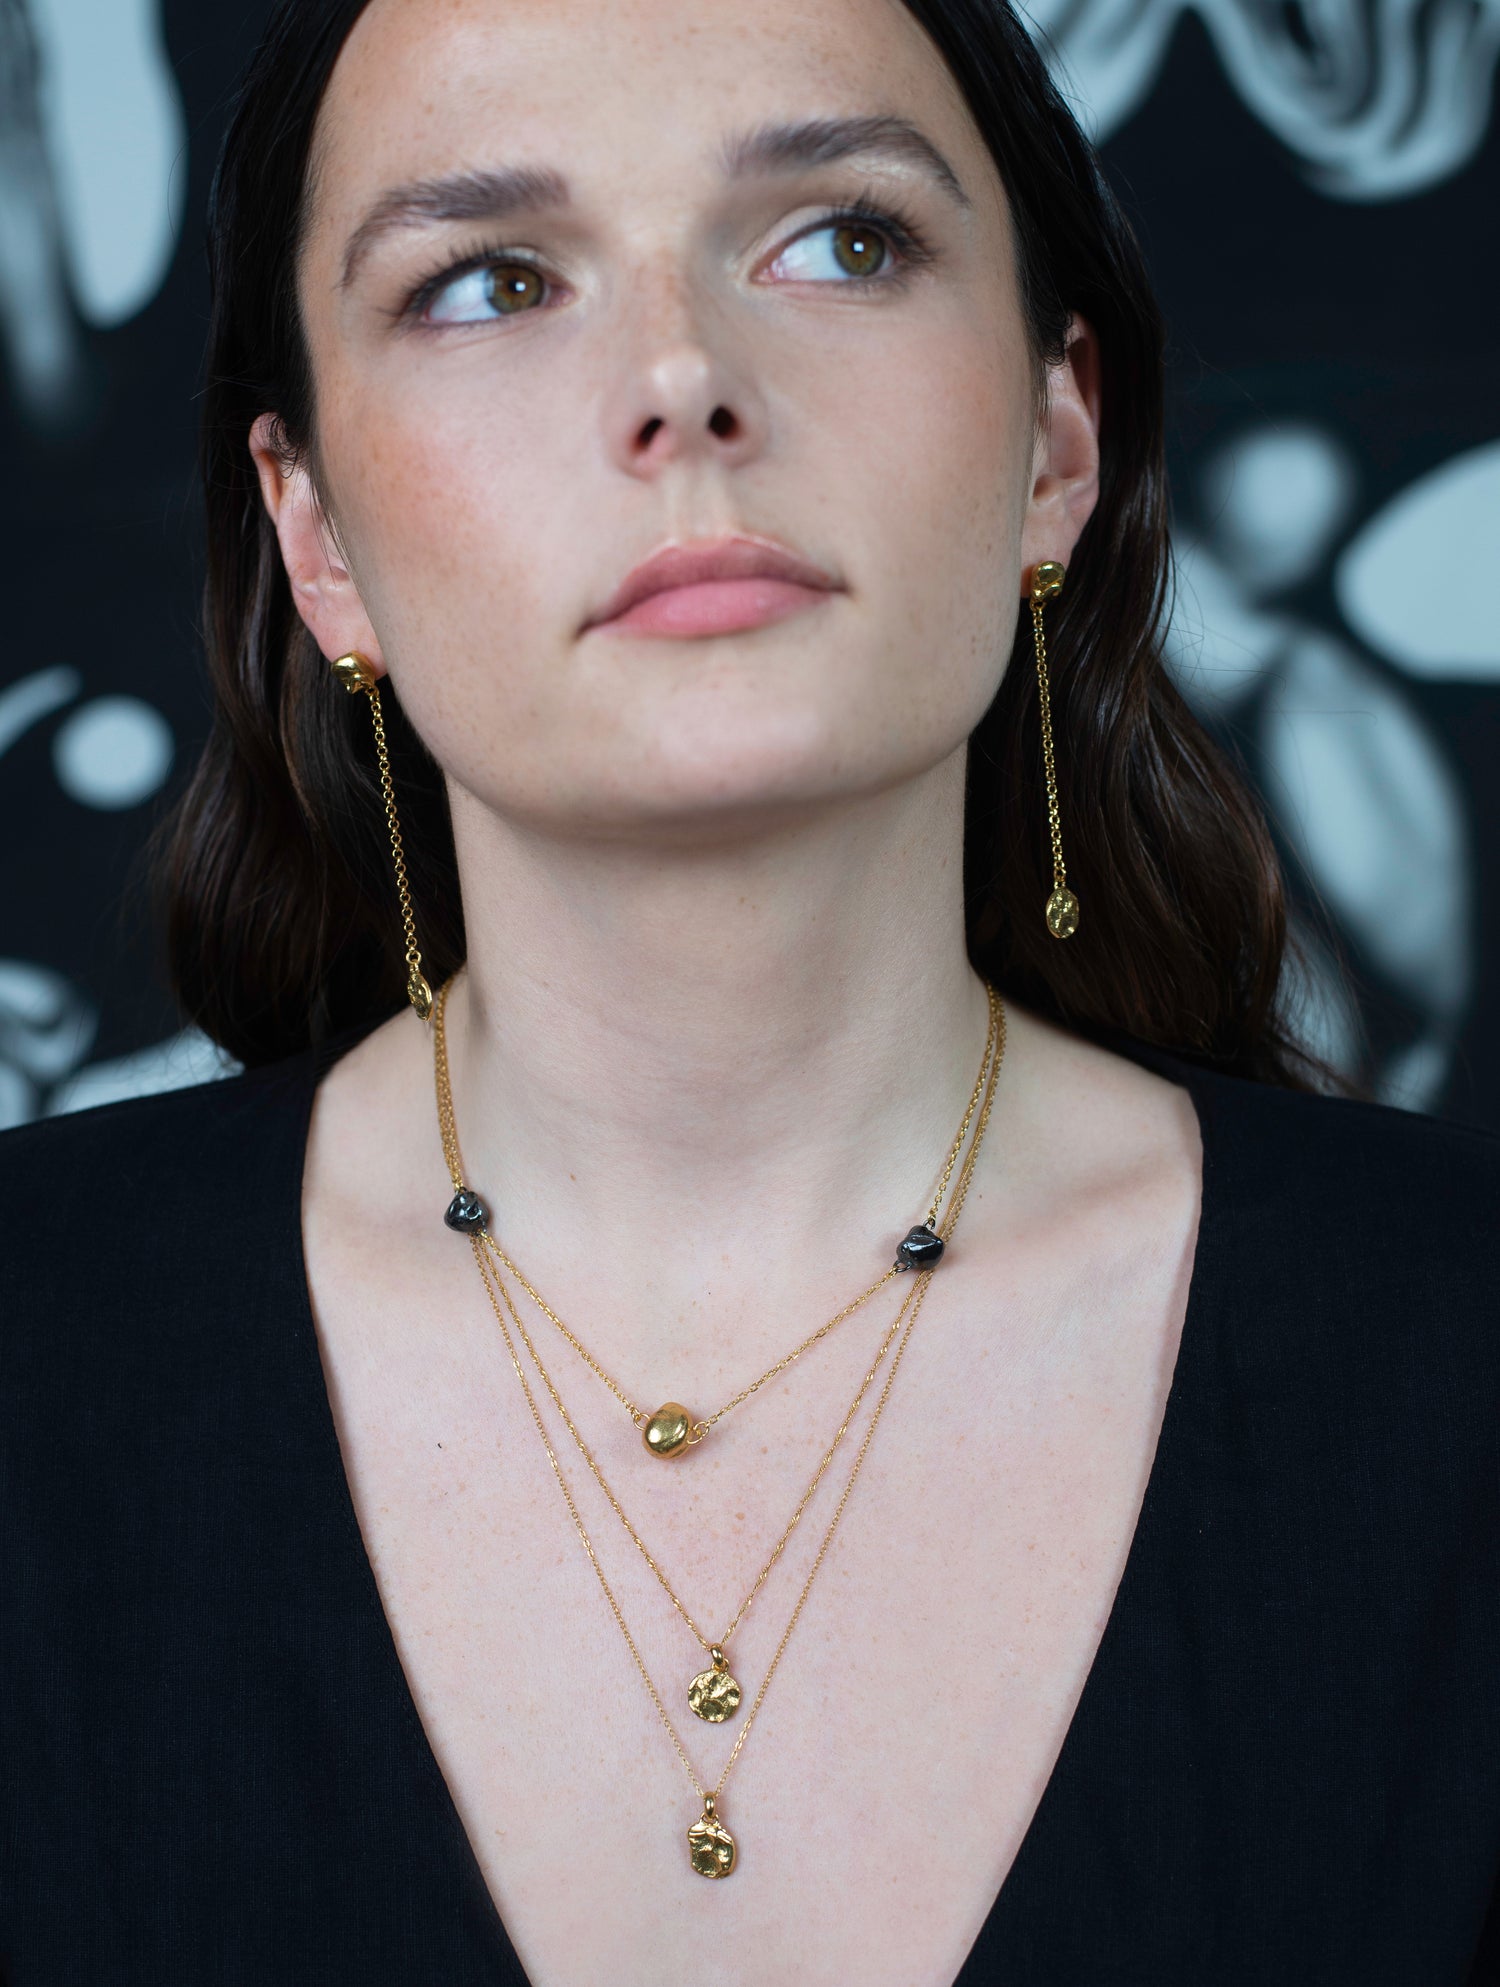 Model wearing gold vermeil necklace and drop earrings